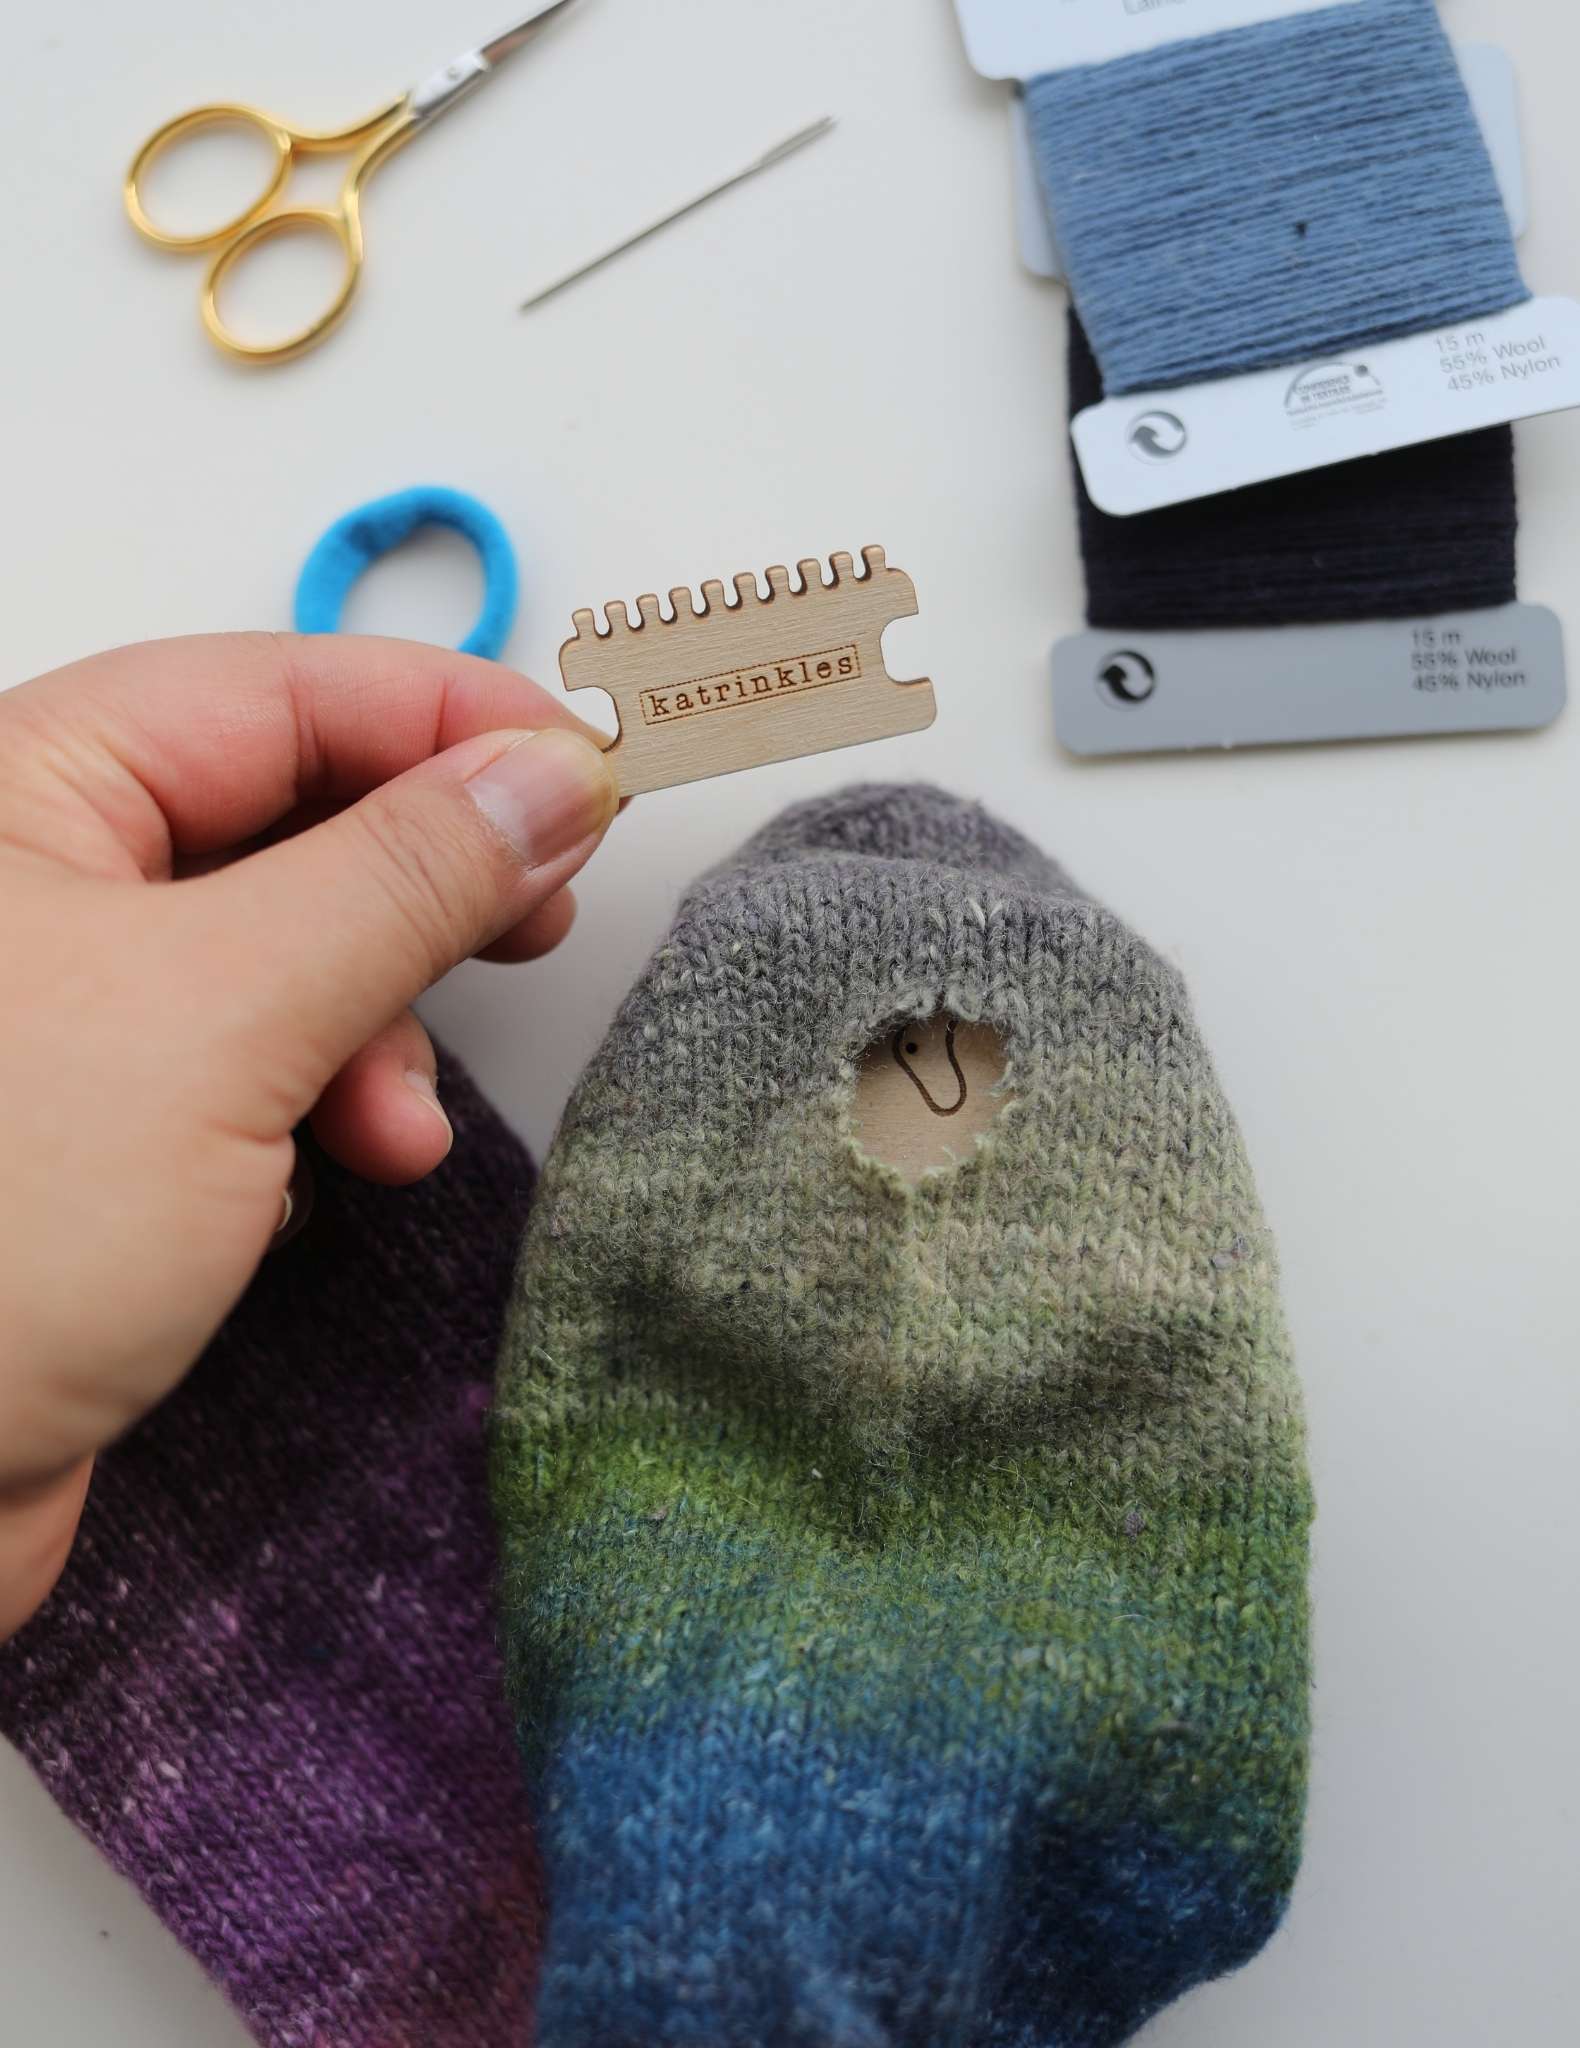 A sock showing a hole in the foot, and underneath the hole is a wooden darning loom, with the wood visible through the hole. A hand to the left holds a small wooden heddle.